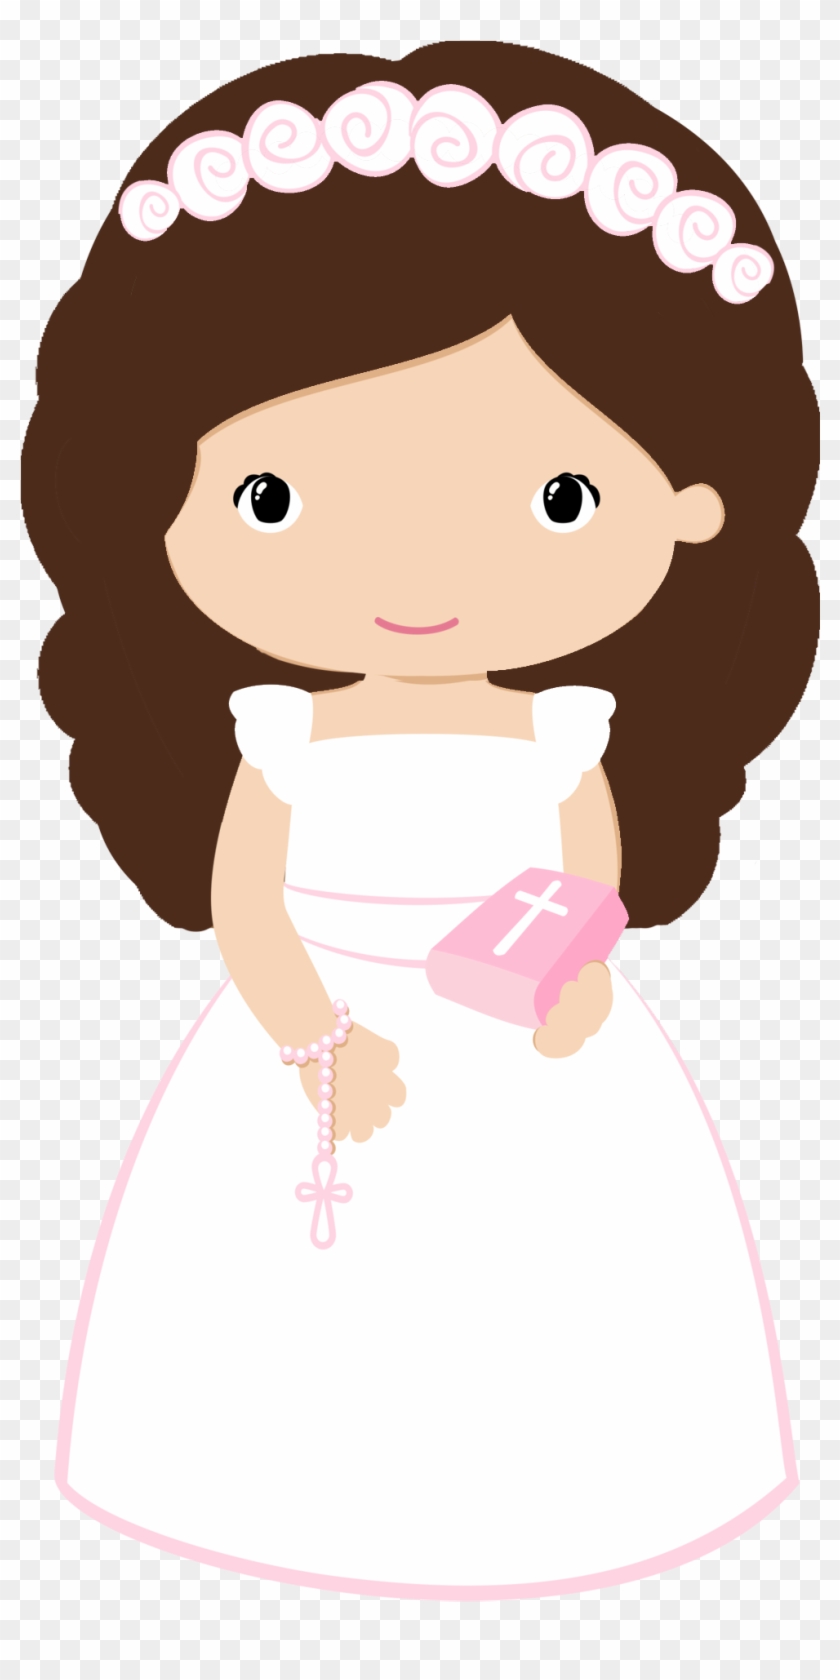 Maria Jose, First Communion, Paper Quilling, Taps, - First Communion Girl Clip Art - Png Download #2431323